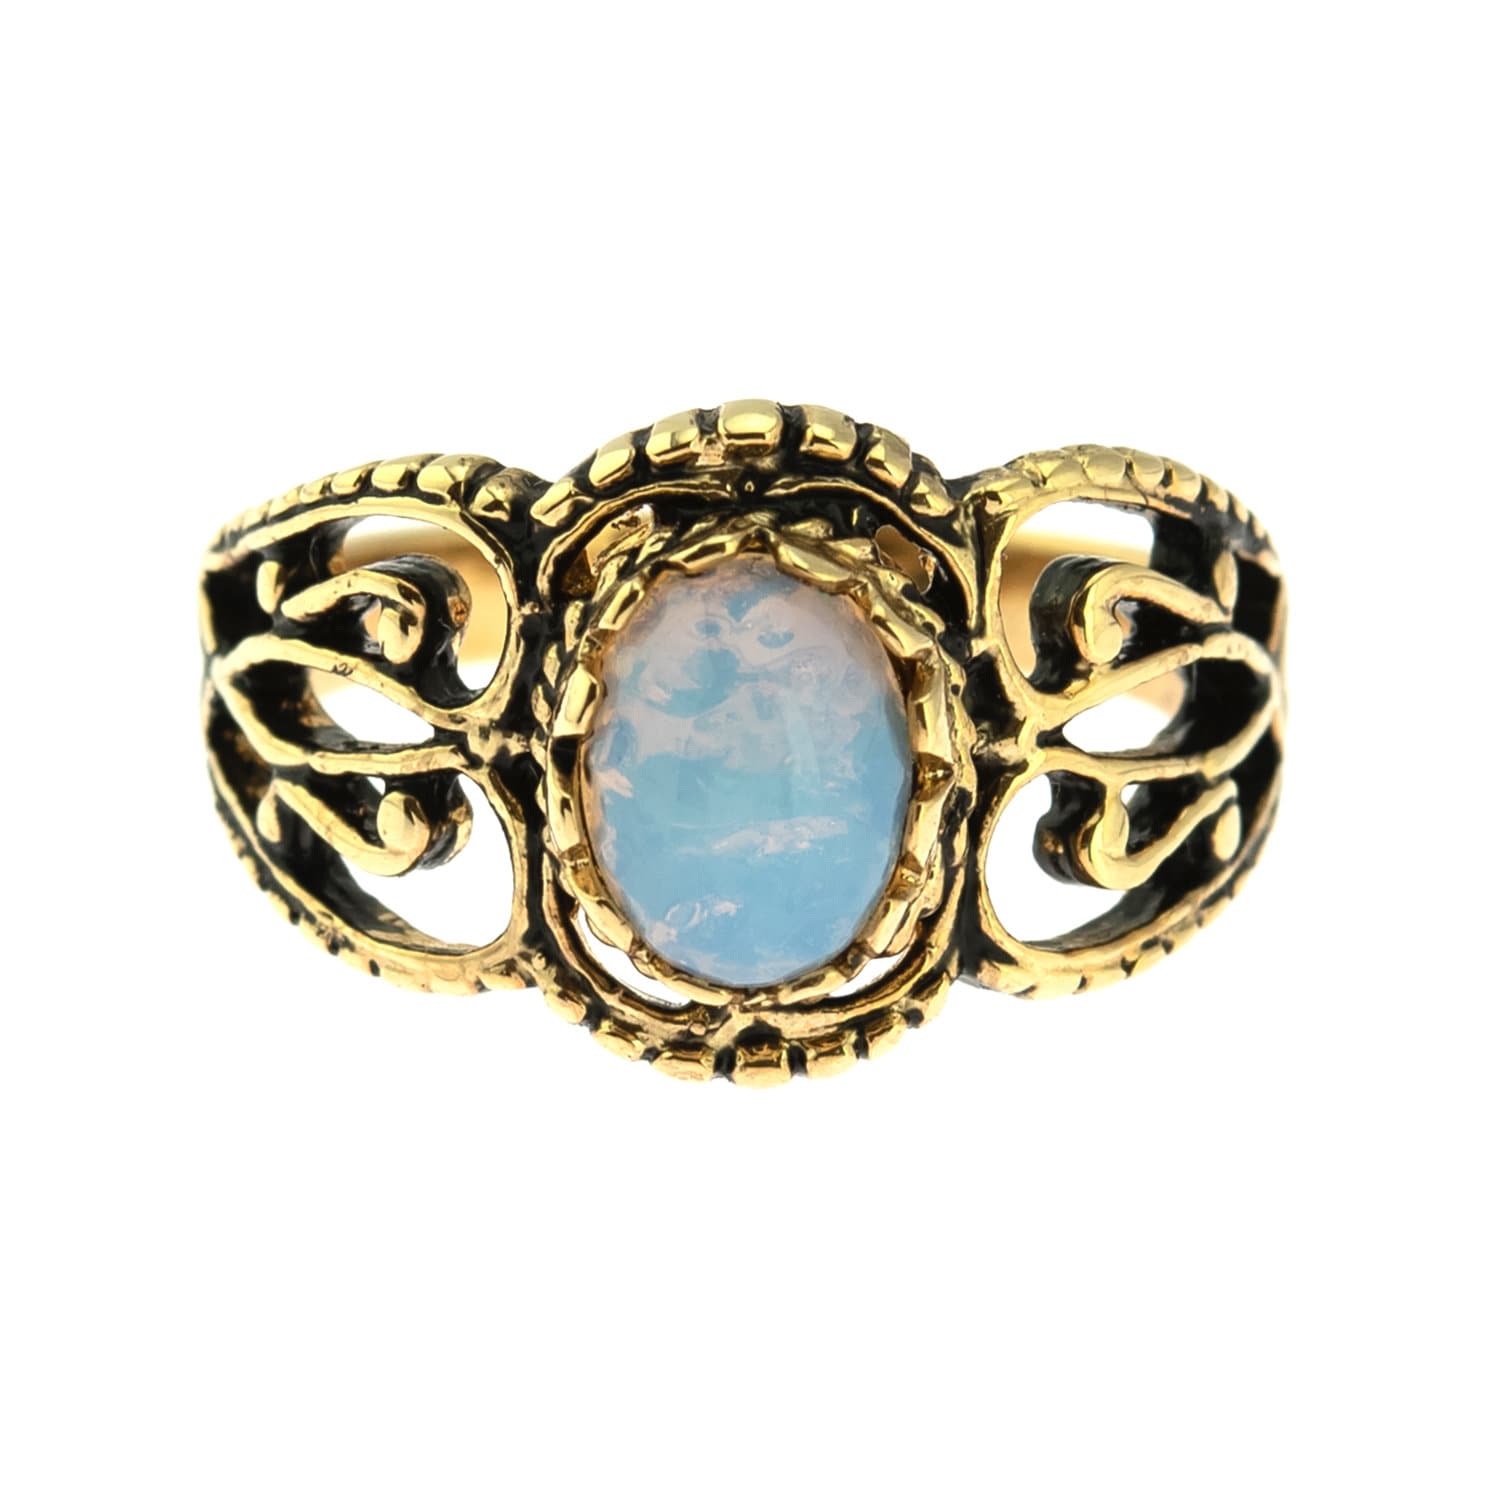 Vintage Ring Pinfire Opal Filigree Ring Antique 18k Gold Womans Jewlery Handmade Size Opals R142 - Limited Stock - Never Worn